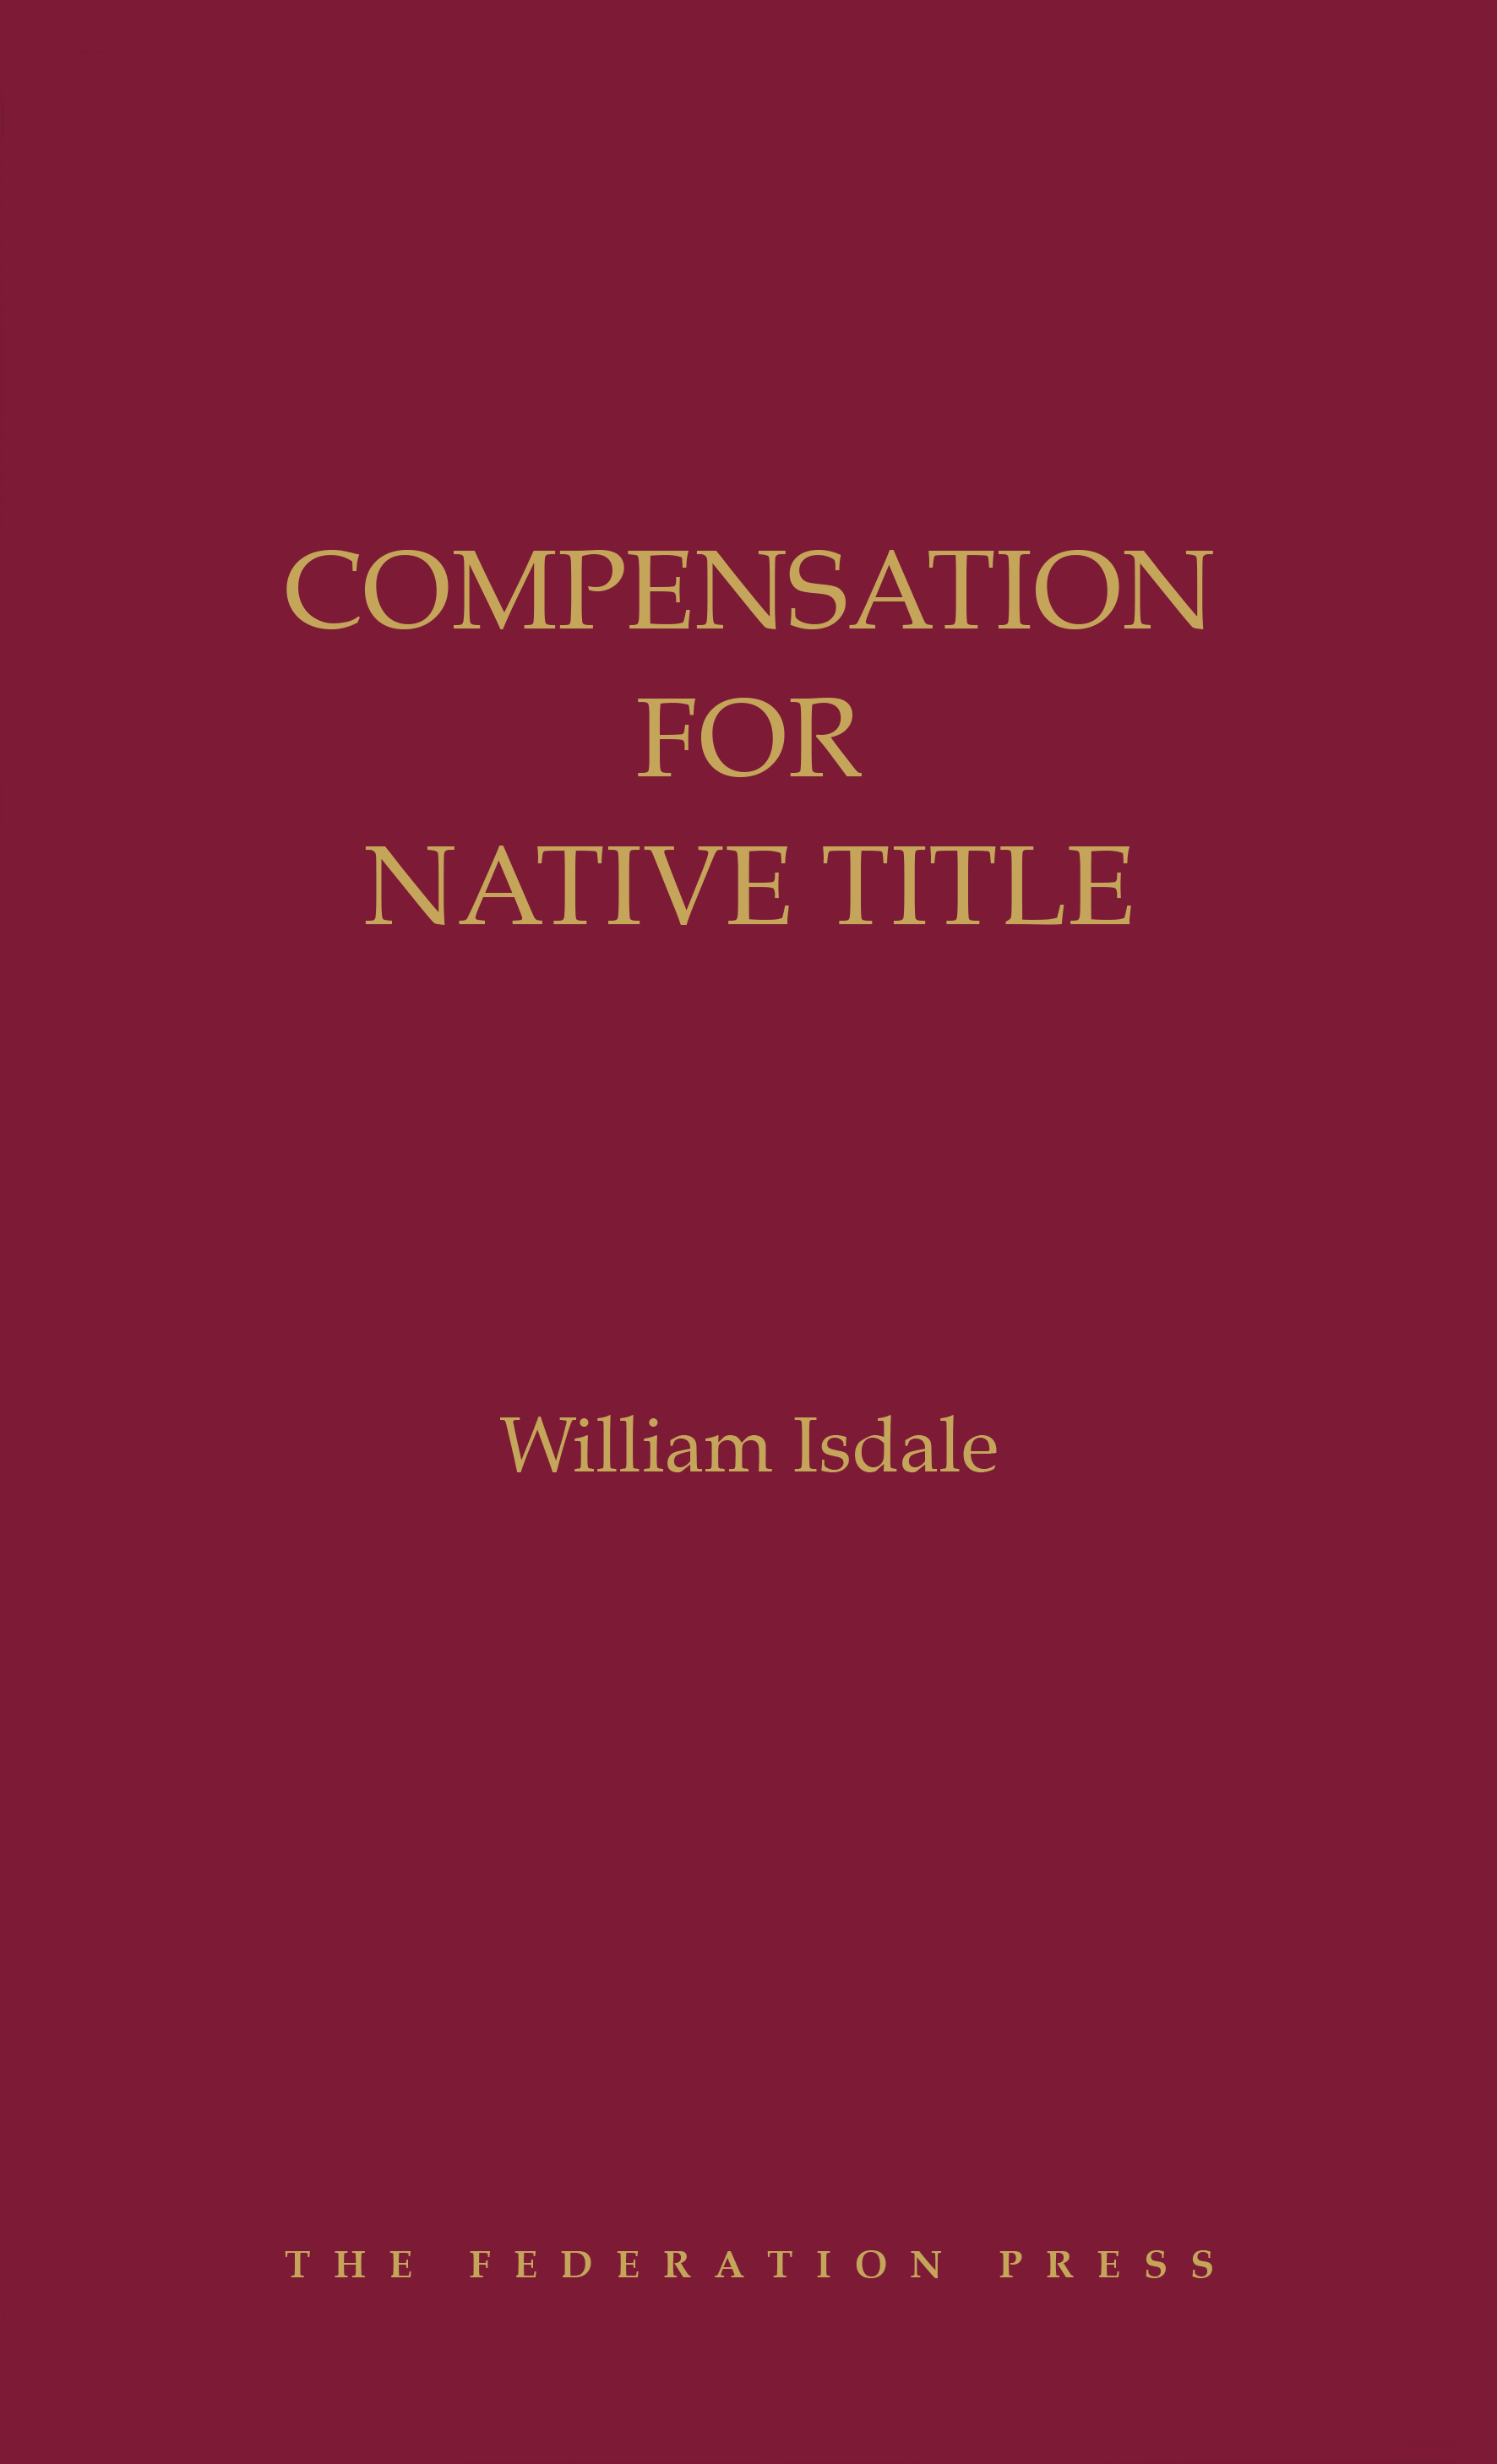 Compensation for Native Title